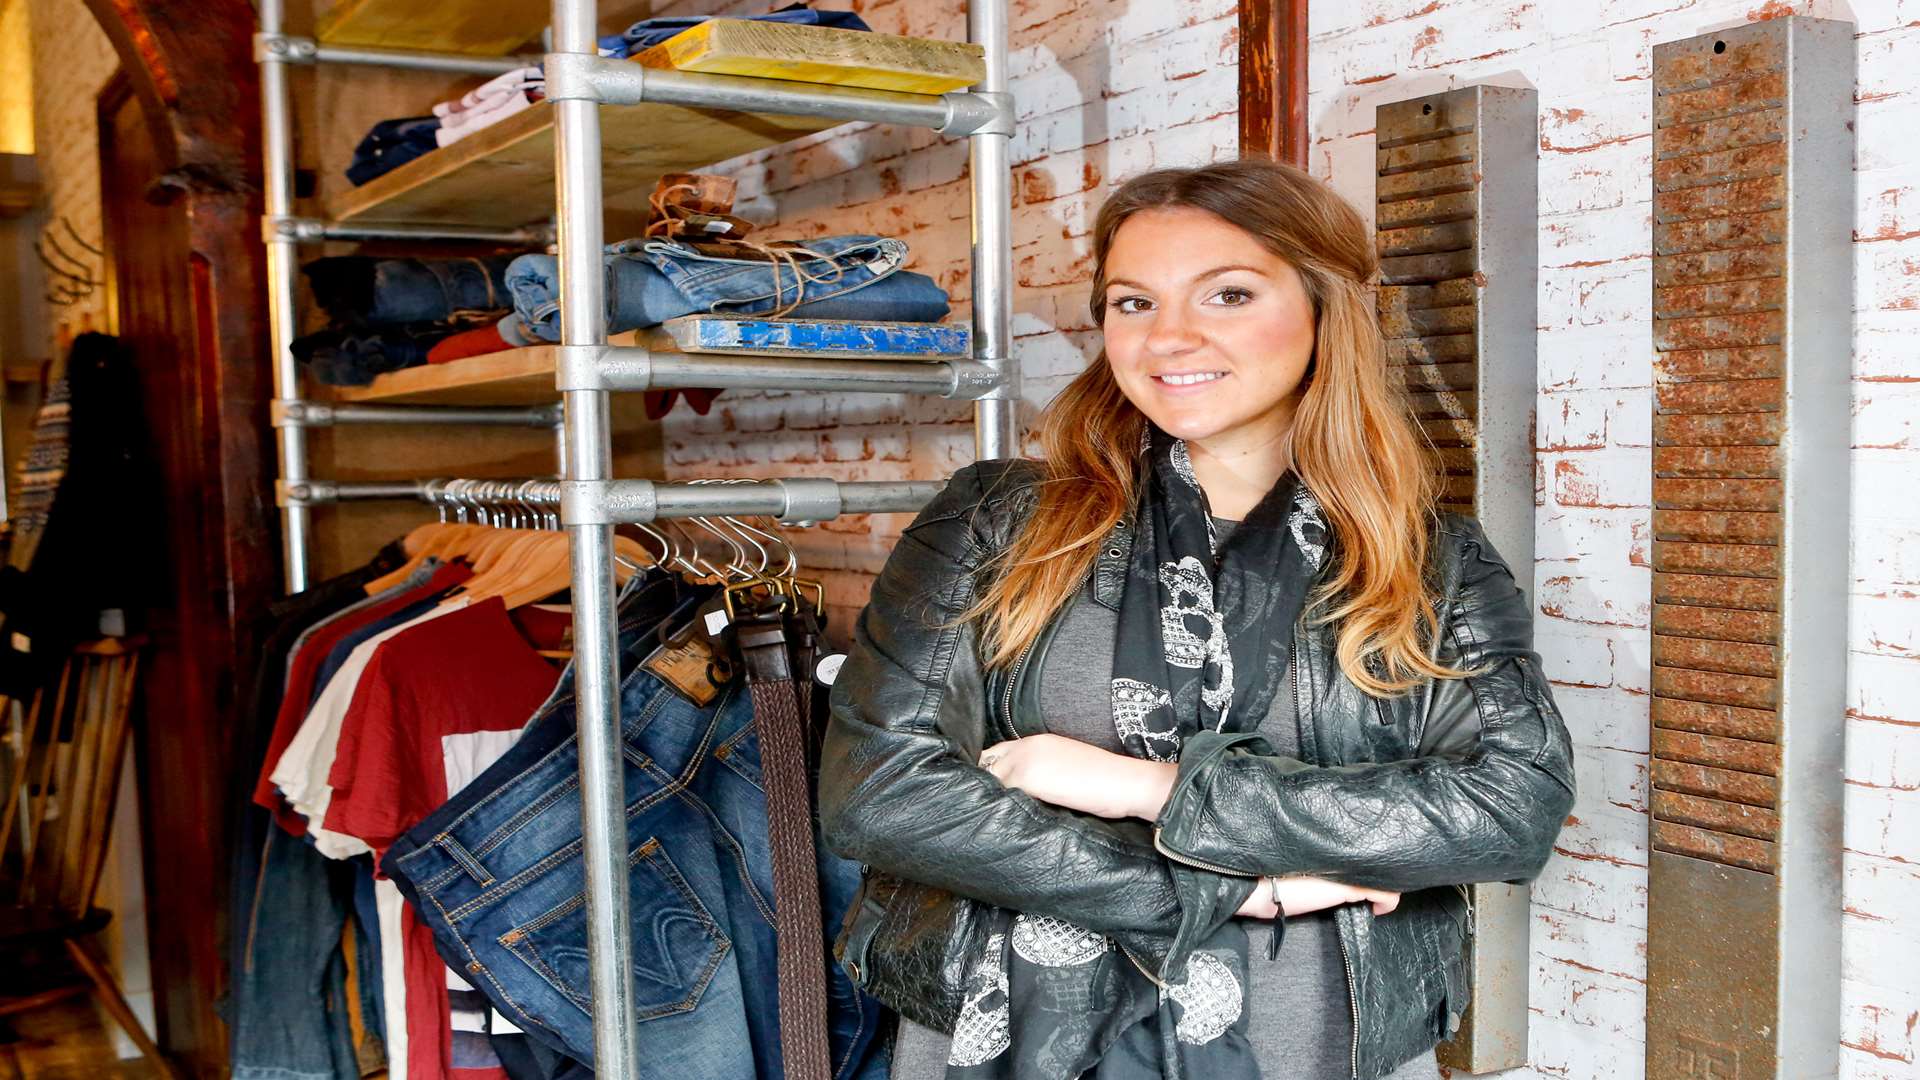 Amy Barker, from Monks & Co Clothing says trade has begun to fall